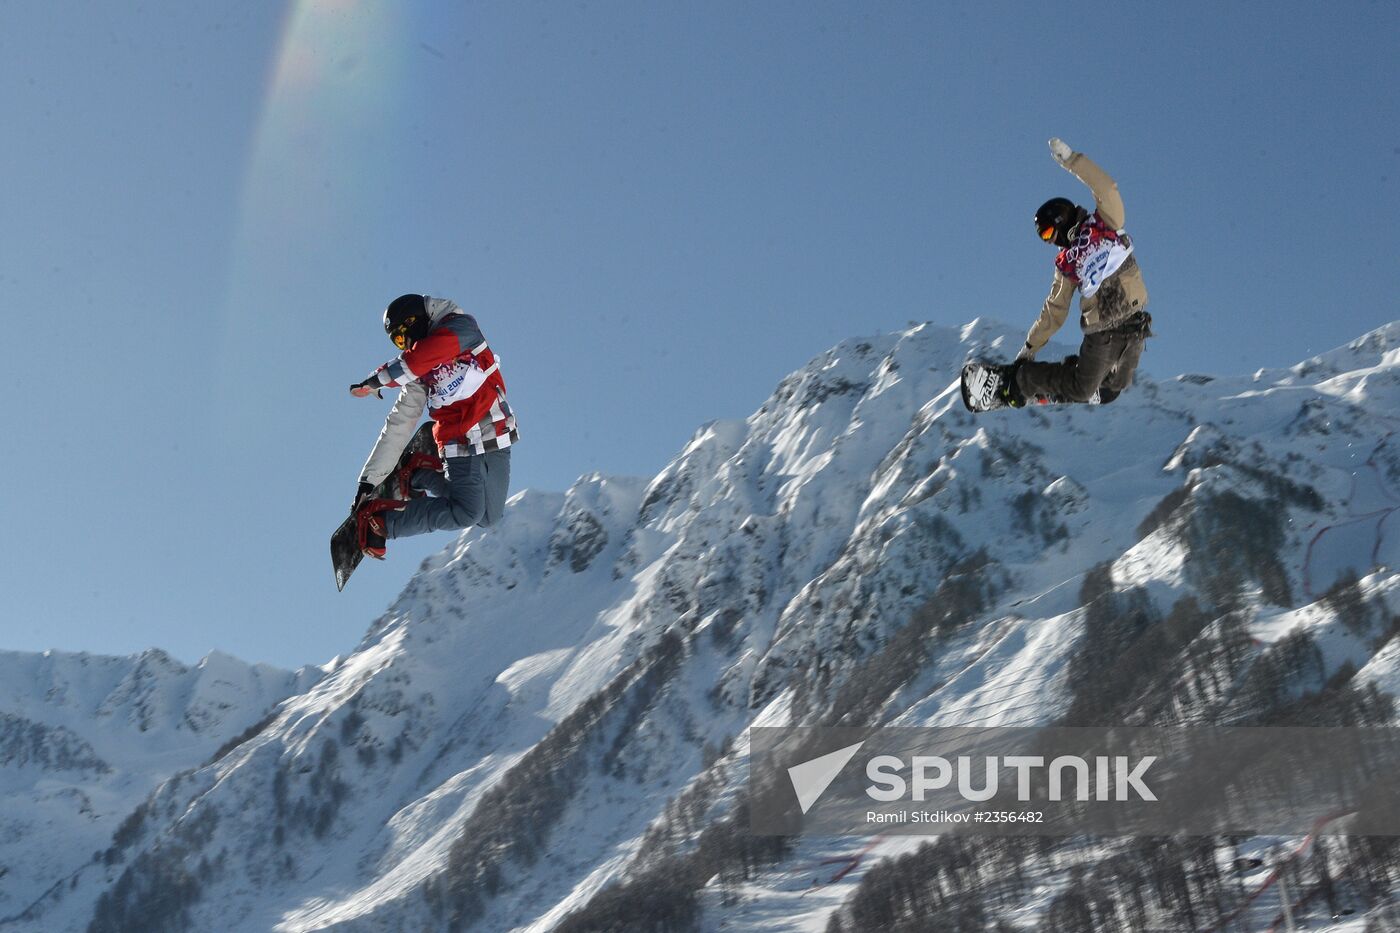 2014 Winter Olympics. Snowboard. Slopestyle. Training sessions